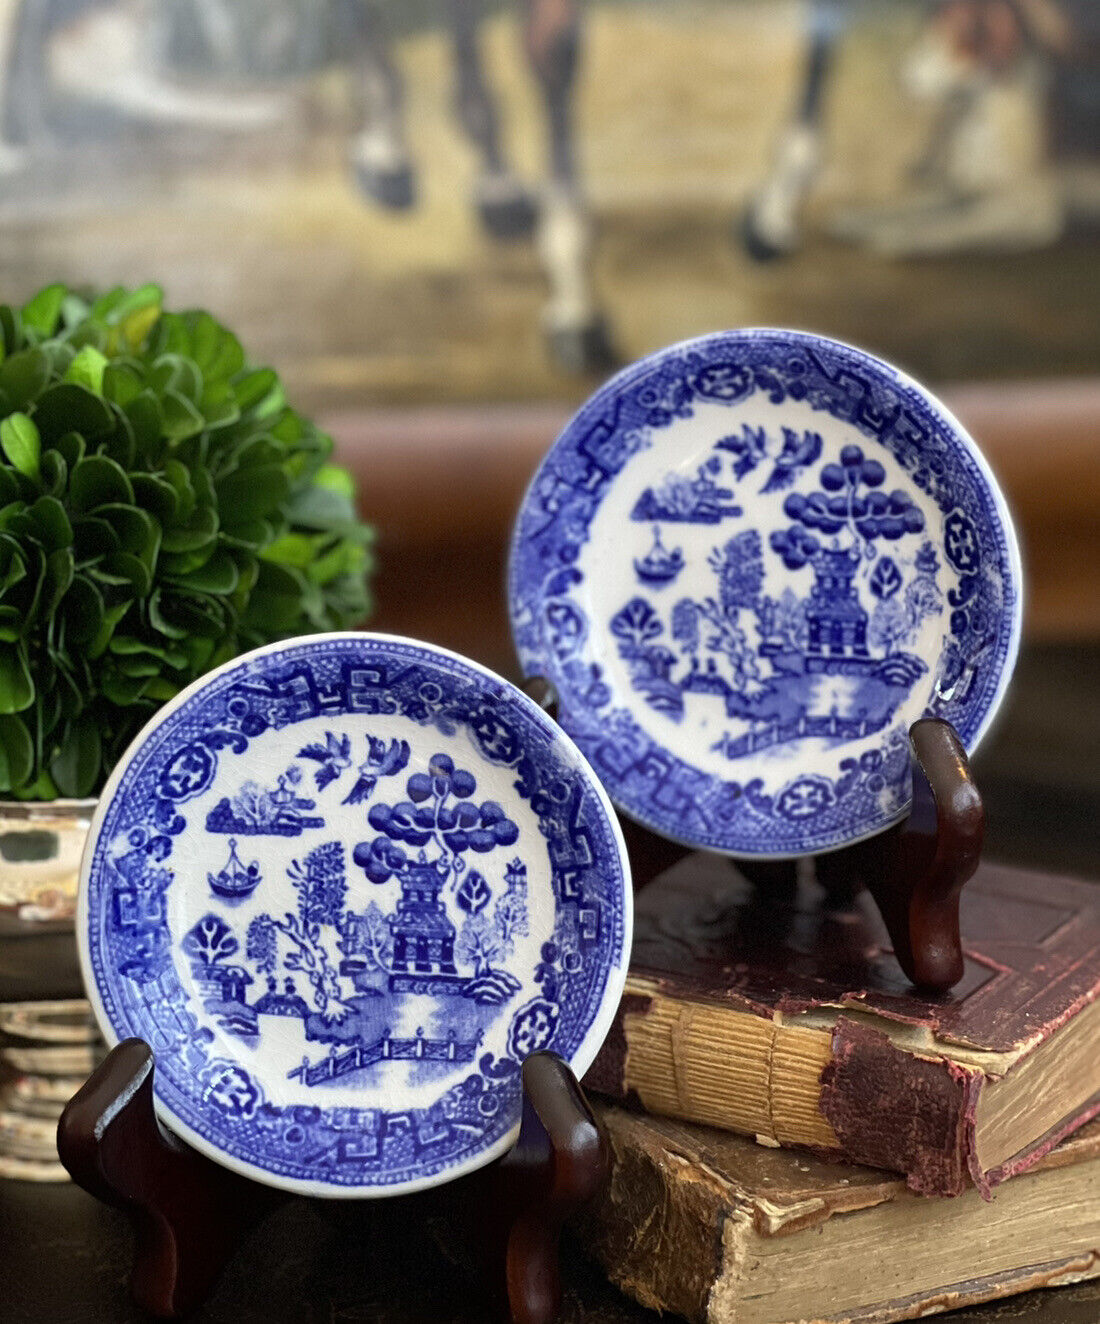 Adorable Miniature Classic English Blue Willow Chinoiserie Canapé Plate Pair 3”